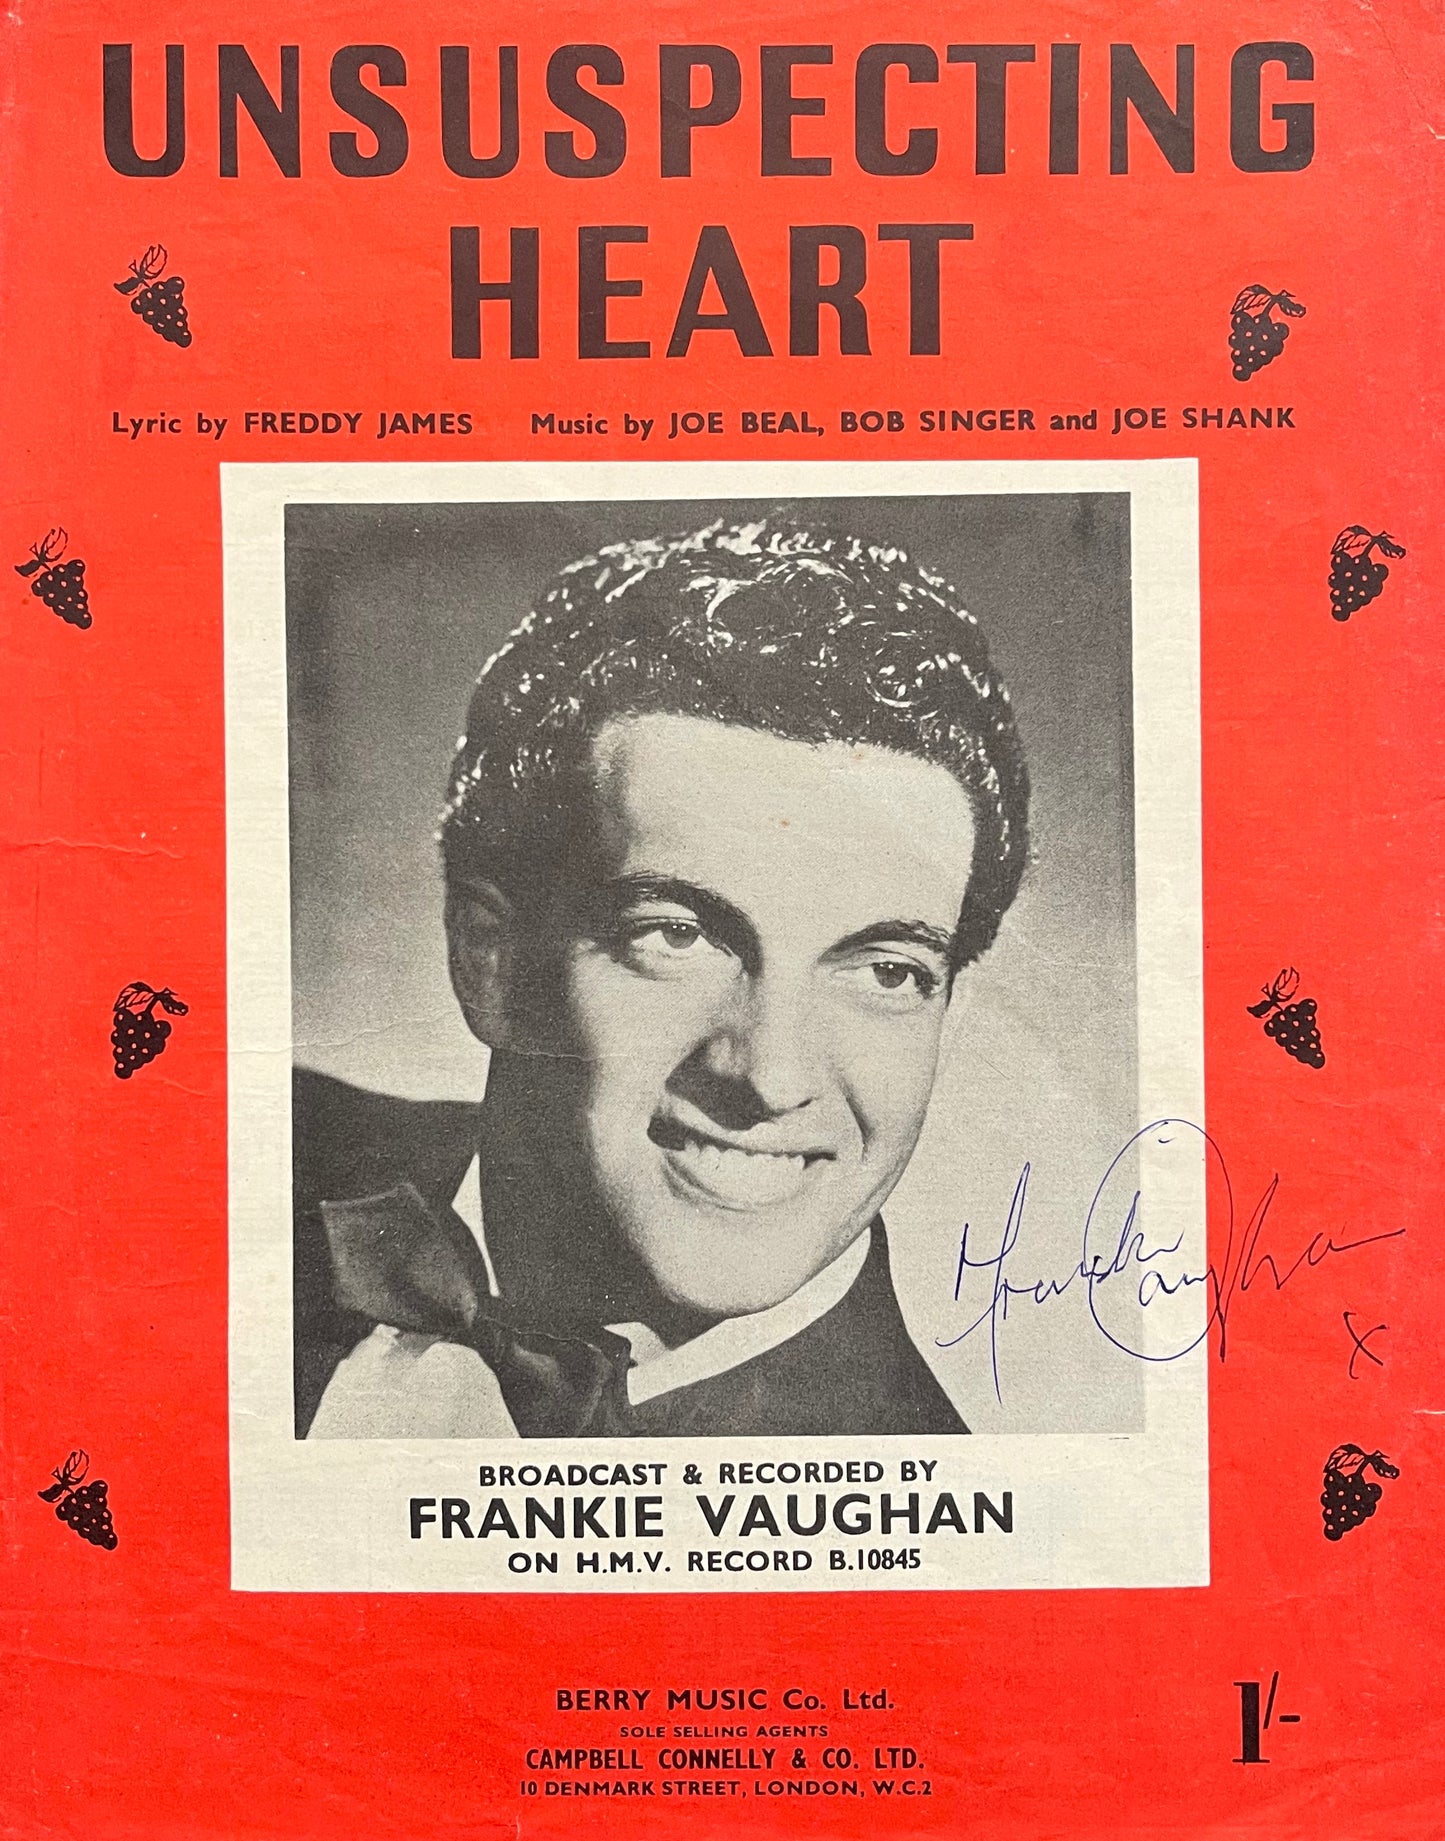 FRANKIE VAUGHAN HAND SIGNED SONG SHEET WITH COA